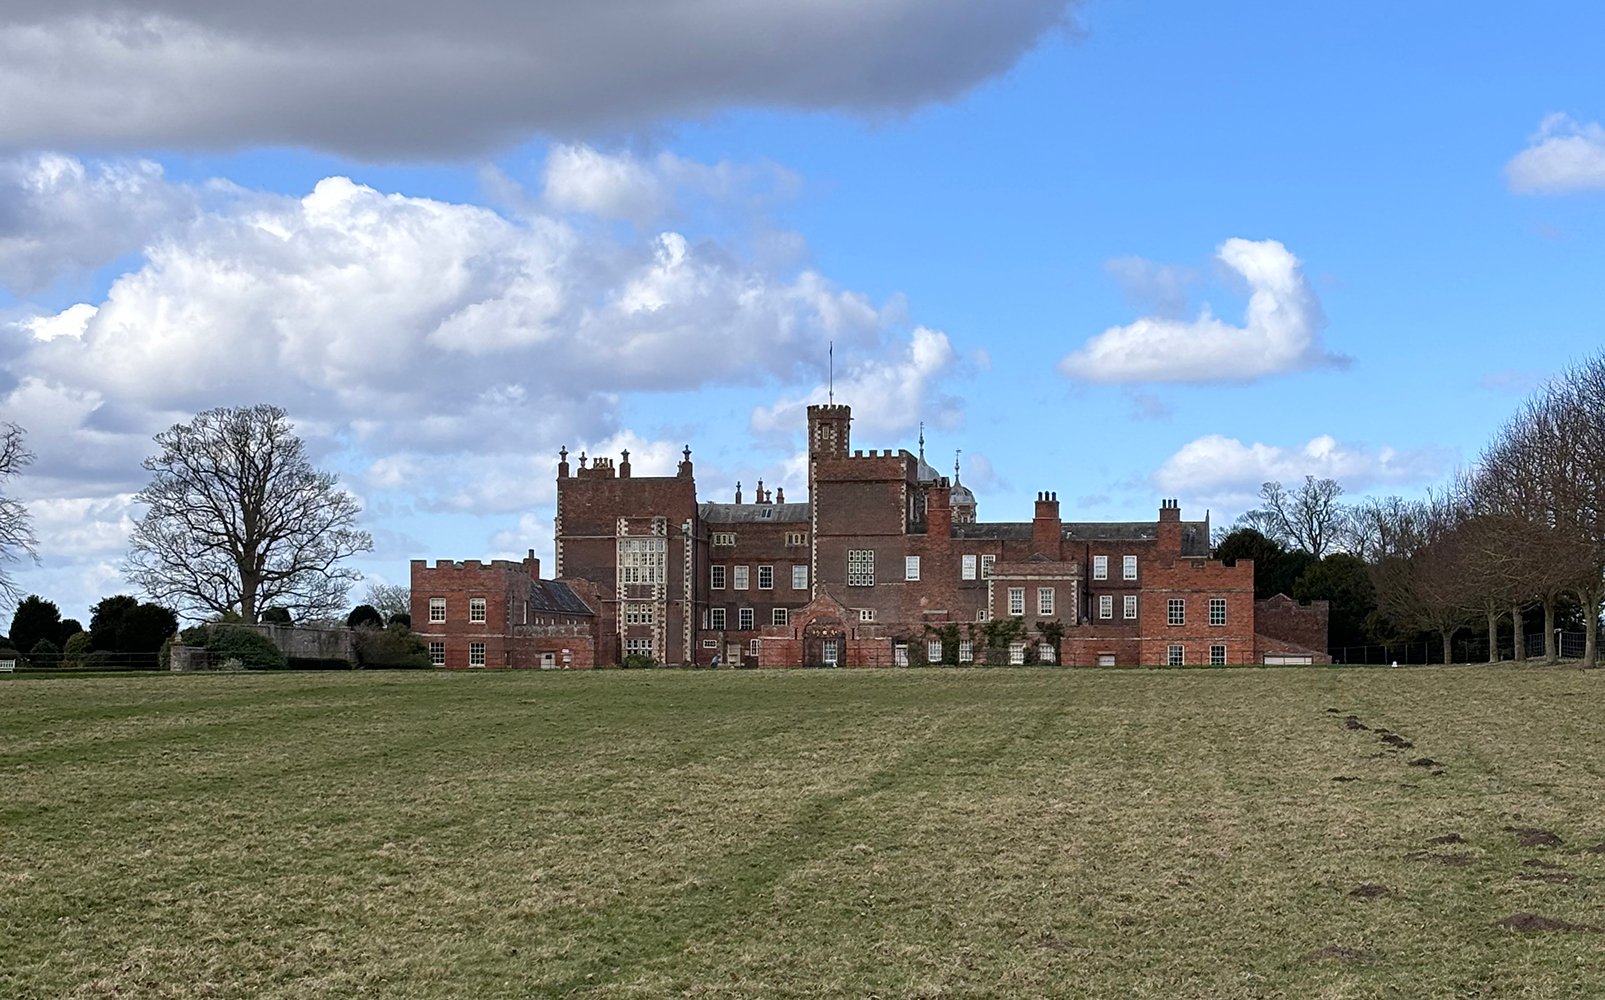 Image name burton constable hall red bricks blue sky and clouds east yorkshire the 7 image from the post A look at the history of Burton Constable Hall, with Dr Emma Wells in Yorkshire.com.